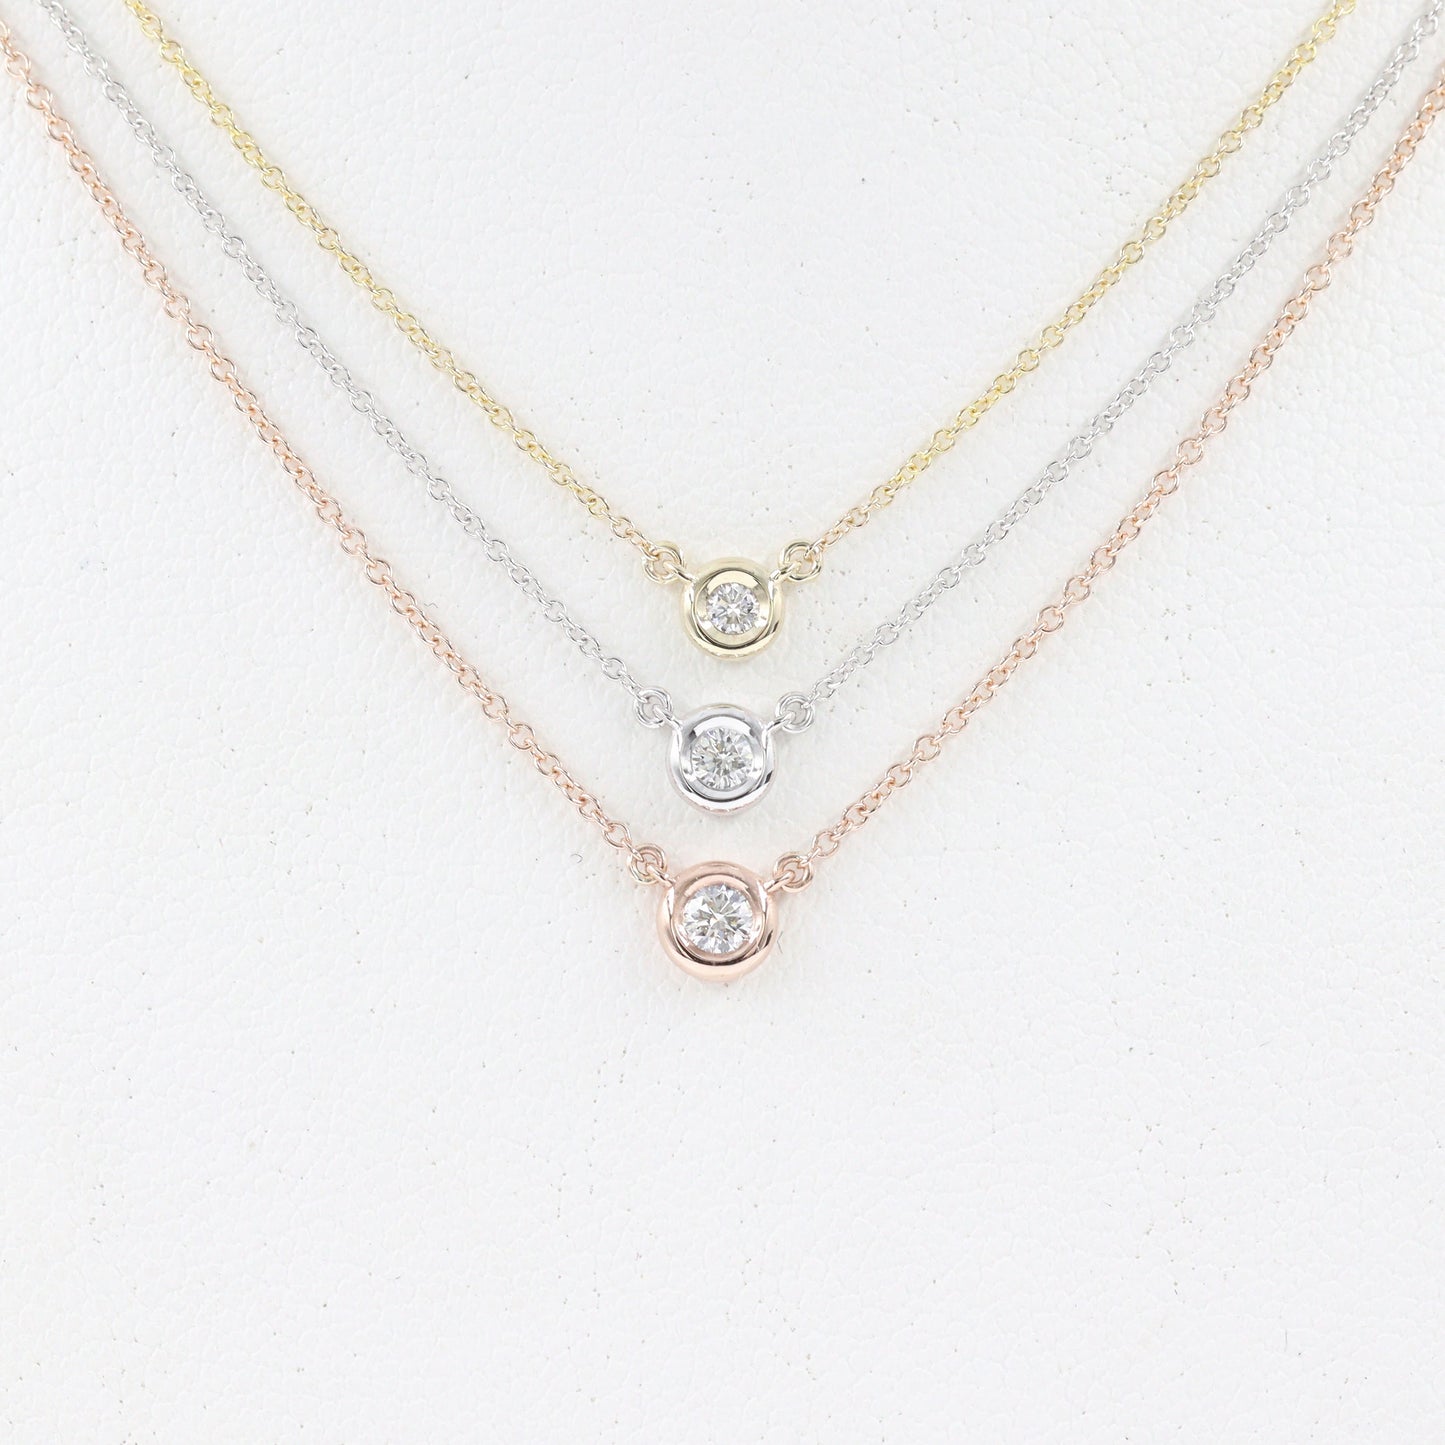 Diamond .03~.07ct Solitaire Necklace/Natural  Diamond Necklace/Minimalist Necklace/Solitaire Diamond Necklace/ Bezel Necklace/Gift for her